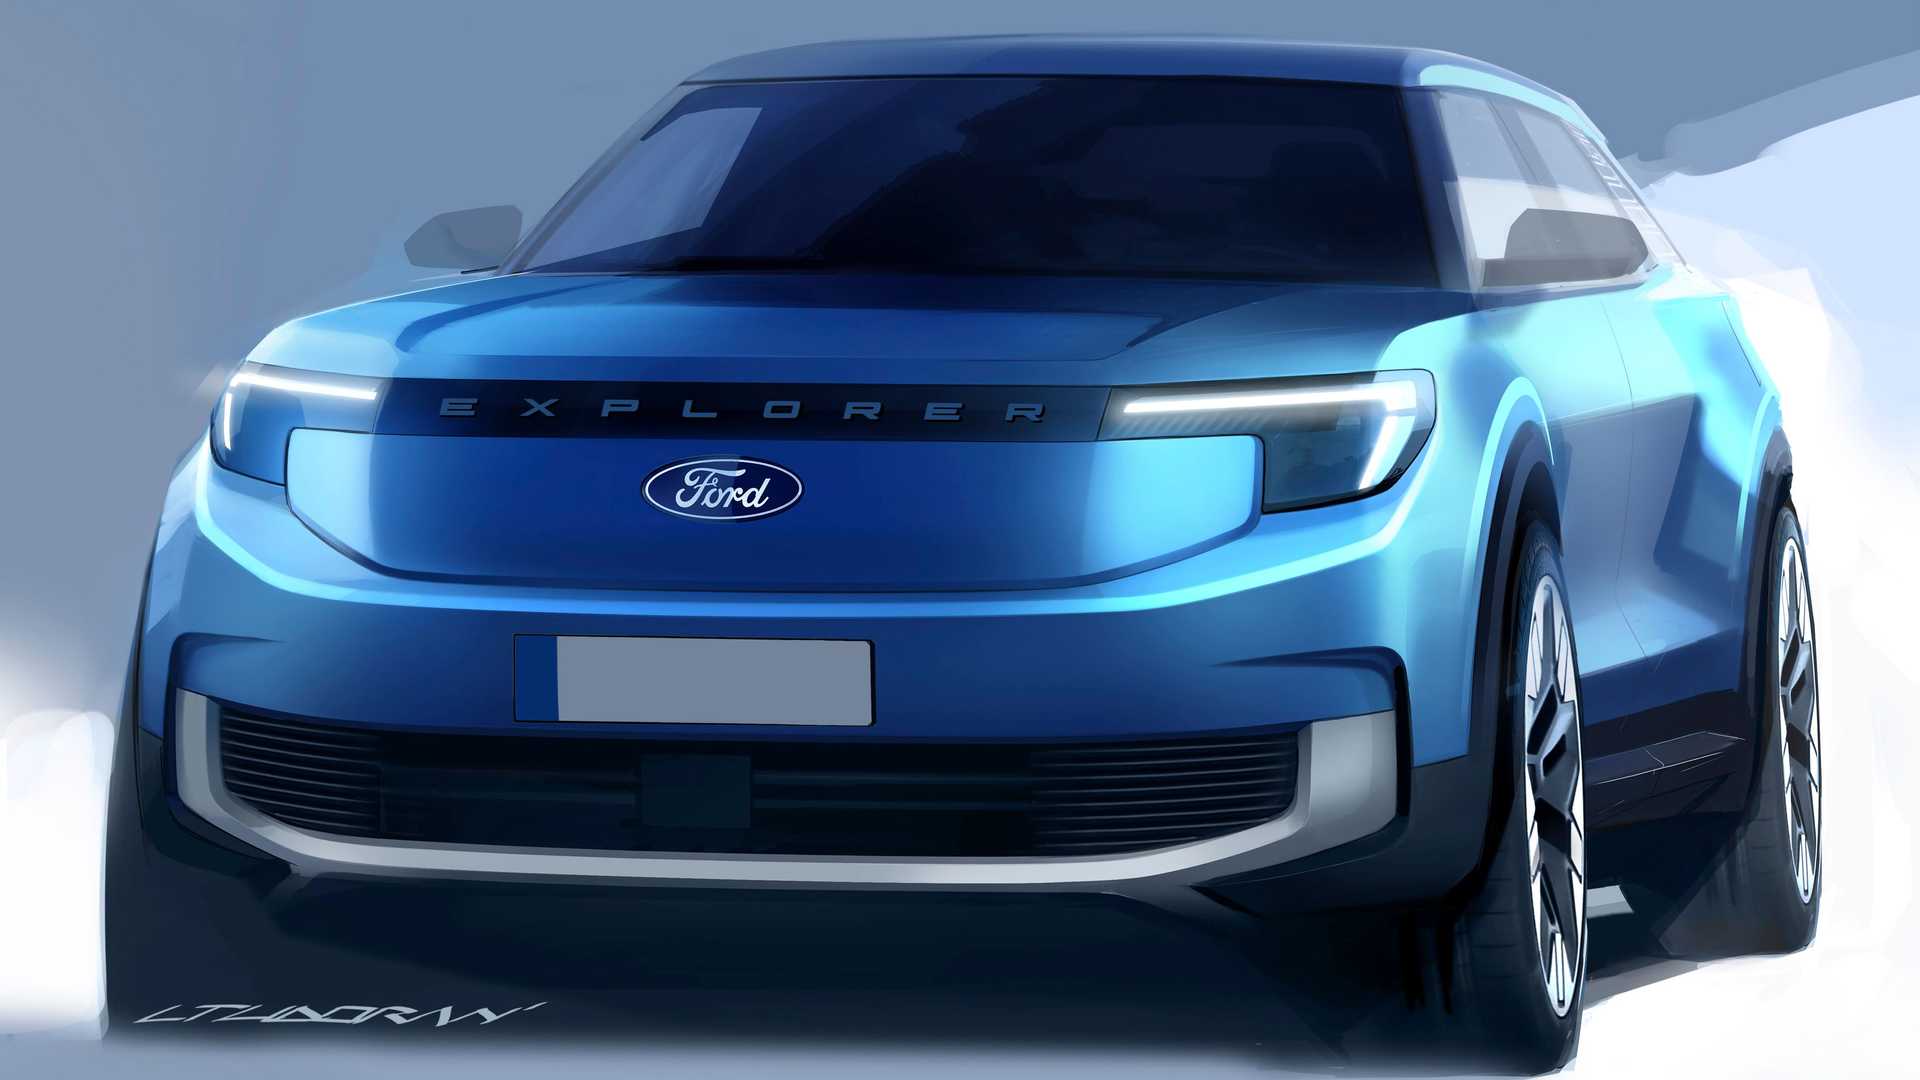 Ford Explorer Ev Is A Vw Meb Based Suv For Europe Priced From 48500